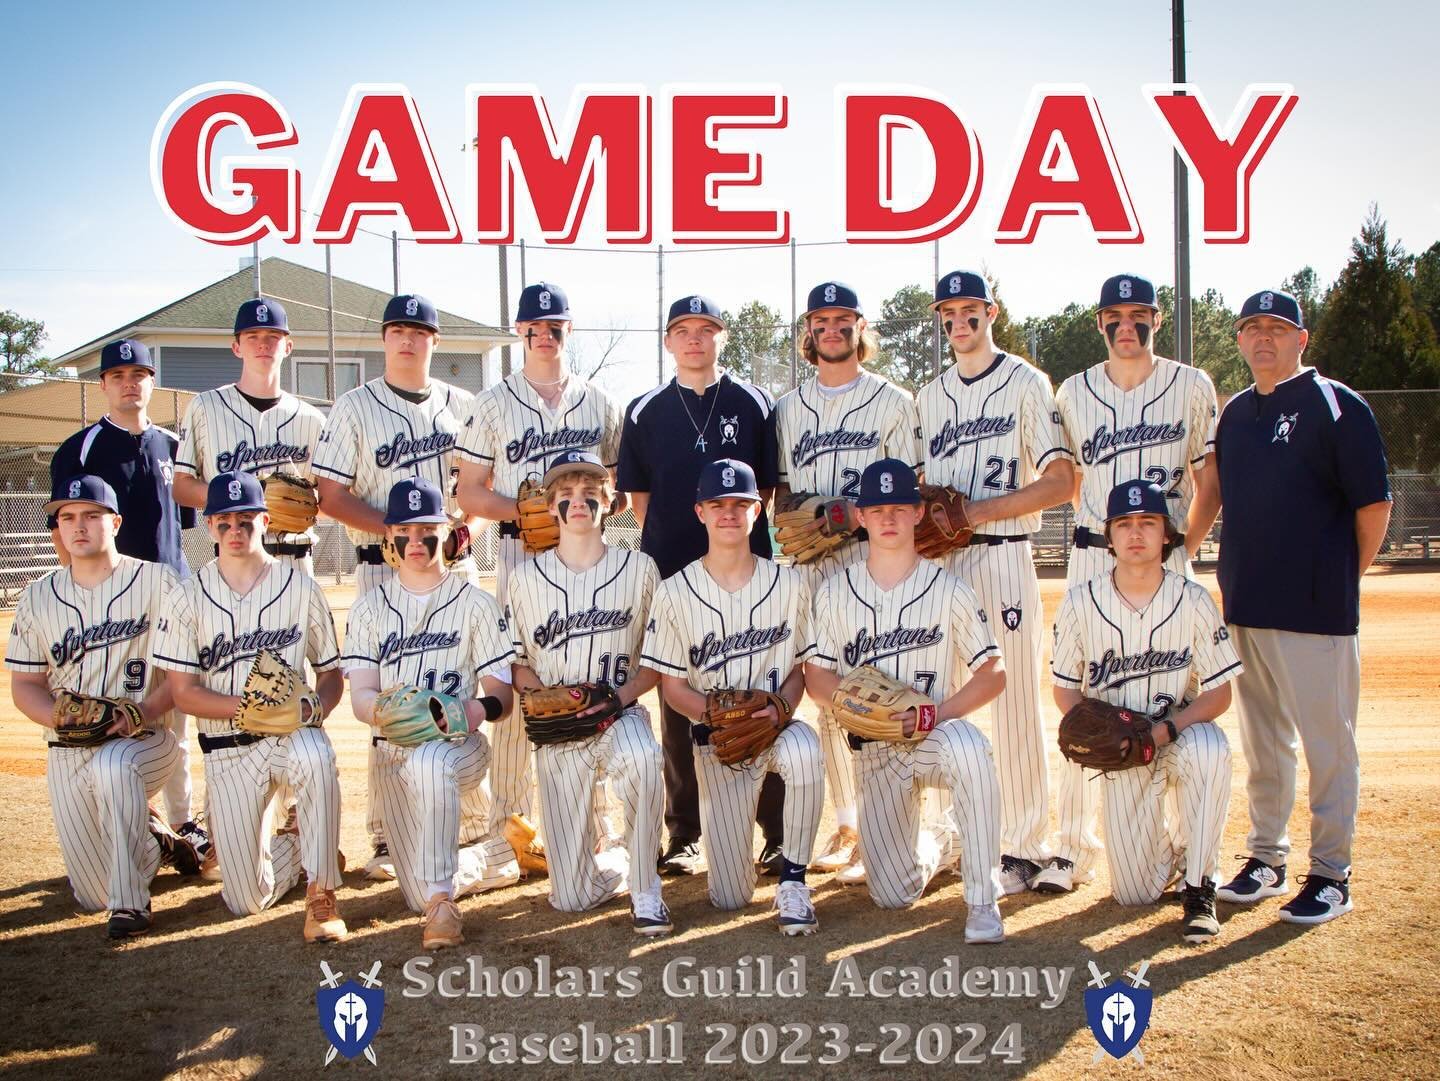 LAST HOME GAME! Come support your Spartans as they take on Pinecrest at Bay Creek Park at 5:30pm today! Buy your tickets at the gate or in advance here: https://gofan.co/event/1339744?schoolId=GA87832 #spartans #baseball #gameday #lasthomegame